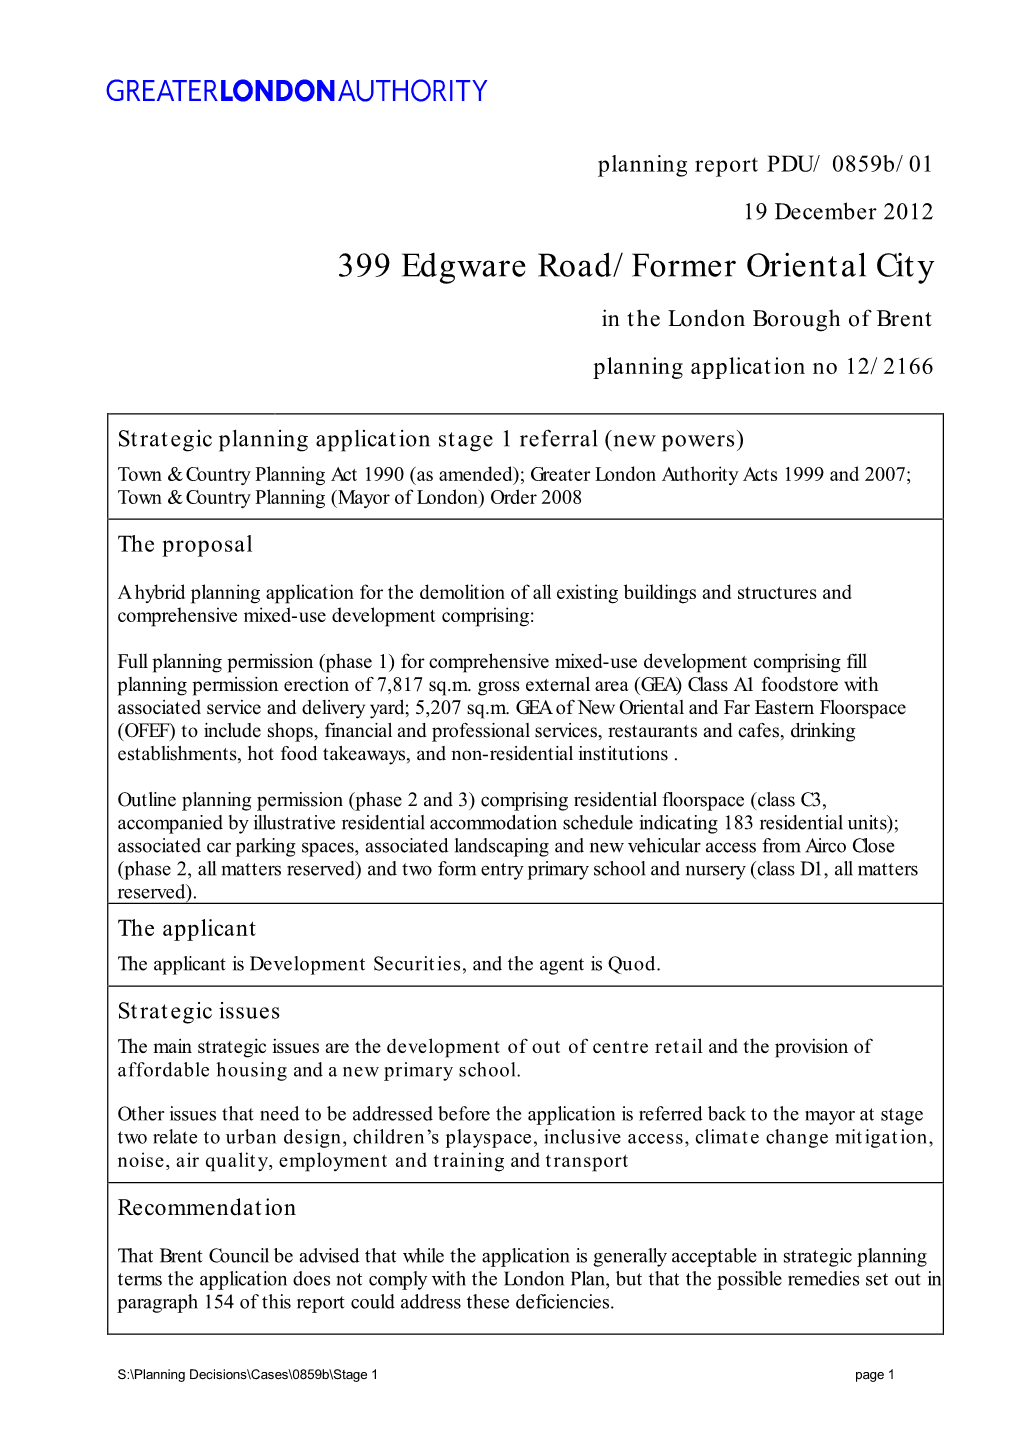 399 Edgware Road/Former Oriental City in the London Borough of Brent Planning Application No 12/2166